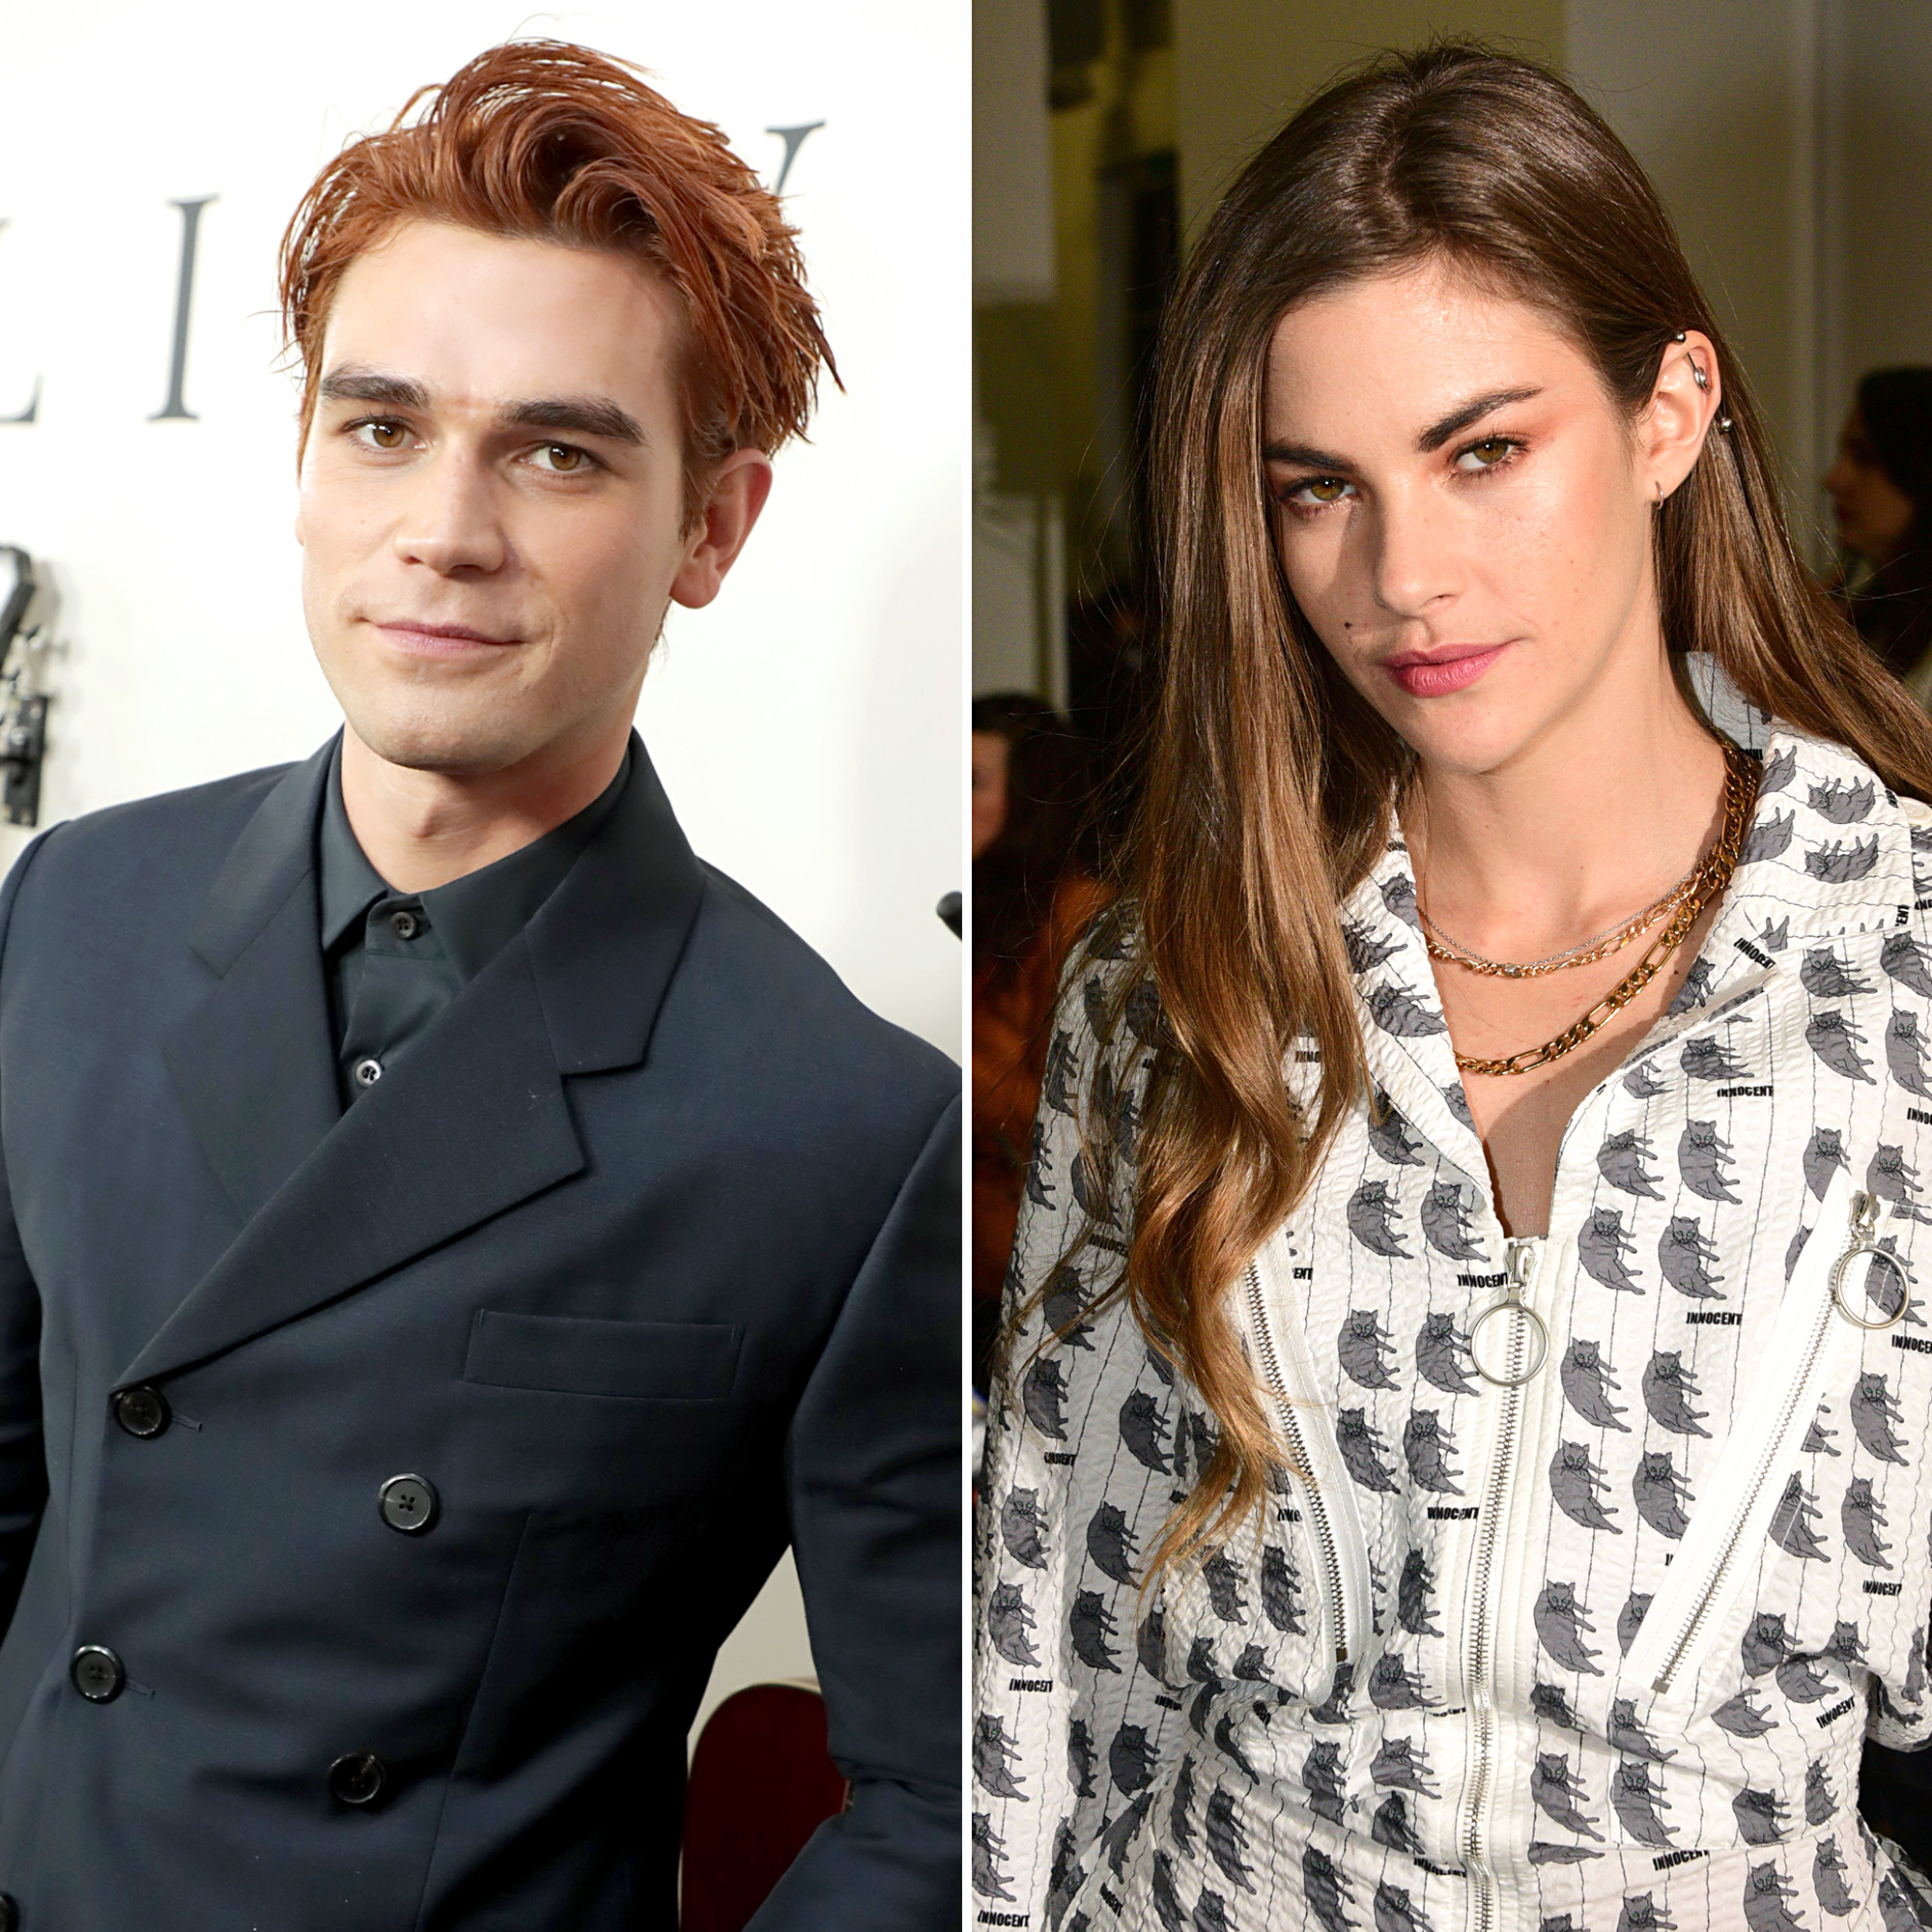 Nude Beach Mississippi - KJ Apa Takes Nude Photos of Clara Berry, She Declares Love for Him